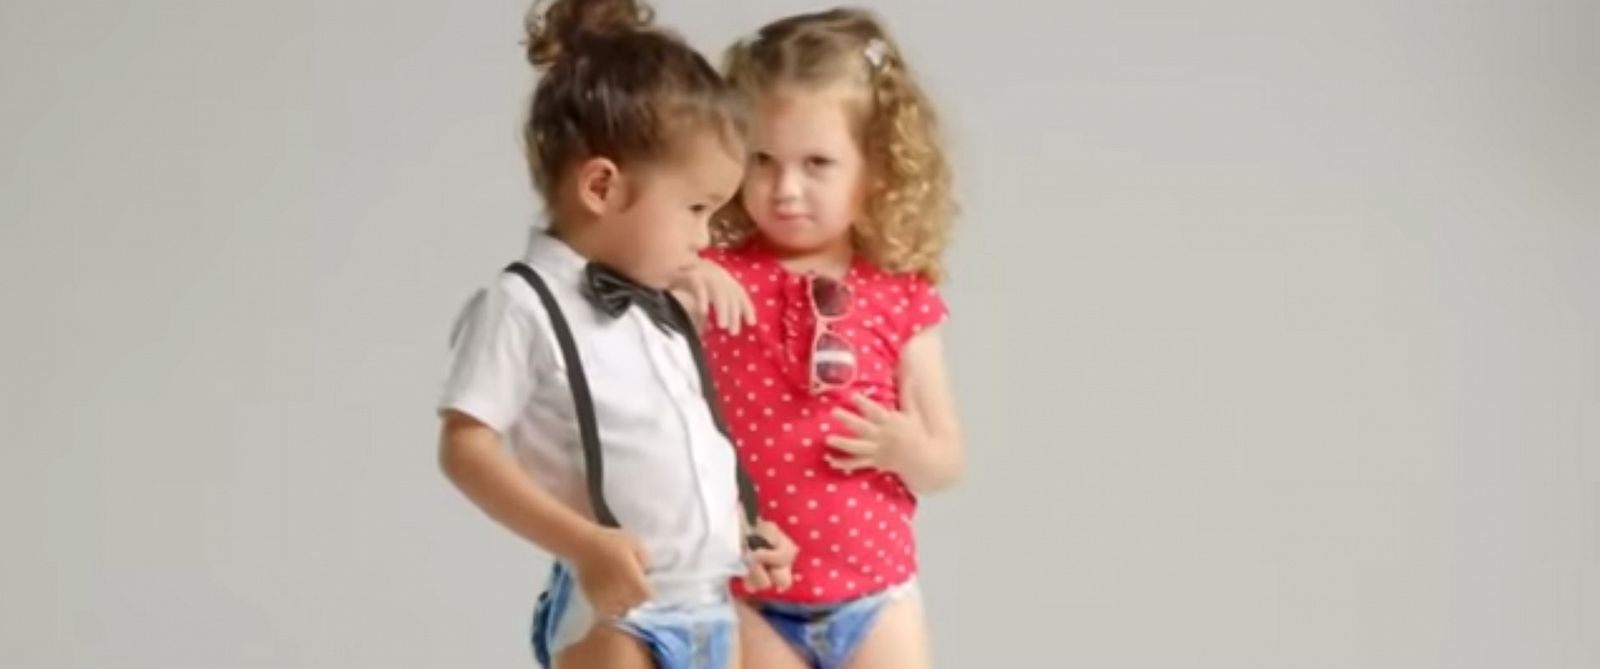 Some Call Huggies Diapers Ad In Israel Sexually Suggestive Abc News